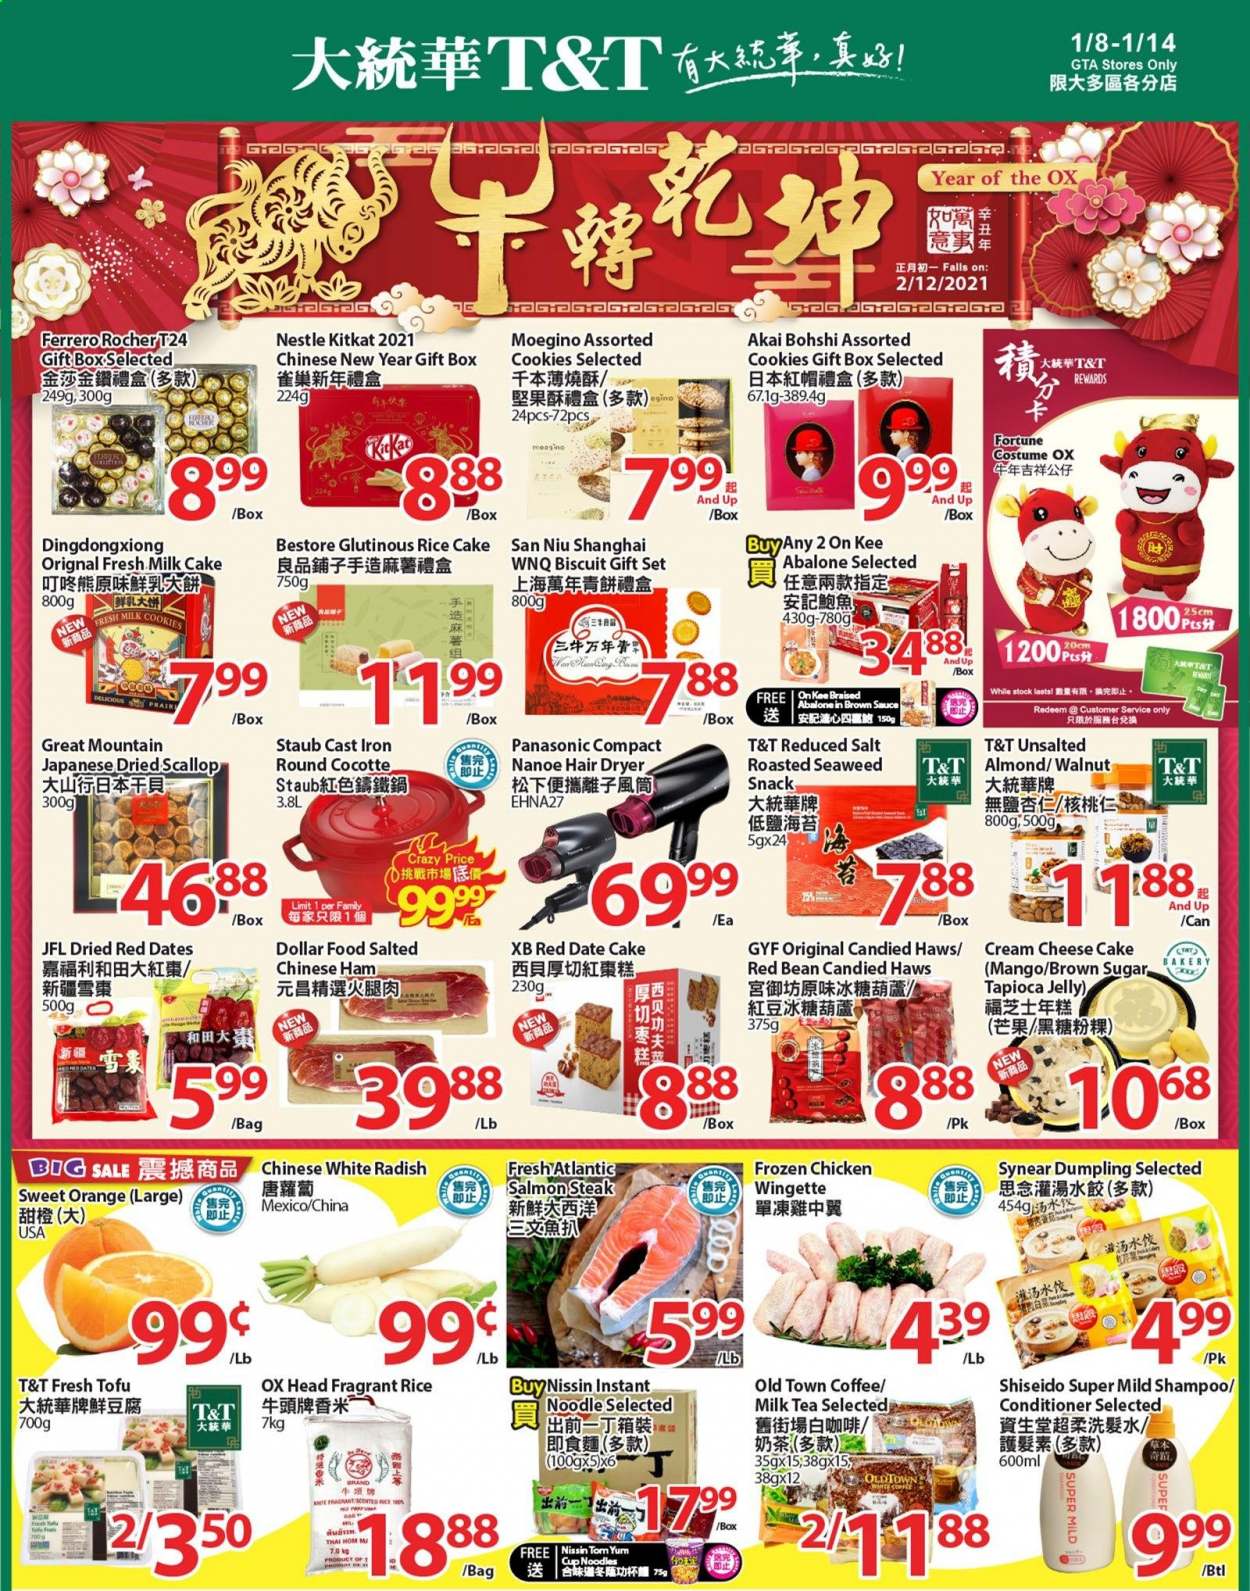 thumbnail - T&T Supermarket Flyer - January 08, 2021 - January 14, 2021 - Sales products - cheesecake, radishes, white radish, mango, salmon, abalone, sauce, dumplings, noodles cup, noodles, Nissin, ham, cream cheese, cheese, tofu, milk, cookies, snack, KitKat, jelly, biscuit, cane sugar, seaweed, rice, brown sauce, tea, coffee, chicken, Shiseido, conditioner, gift set, pin, gift box, Nestlé, shampoo, Panasonic, steak. Page 1.